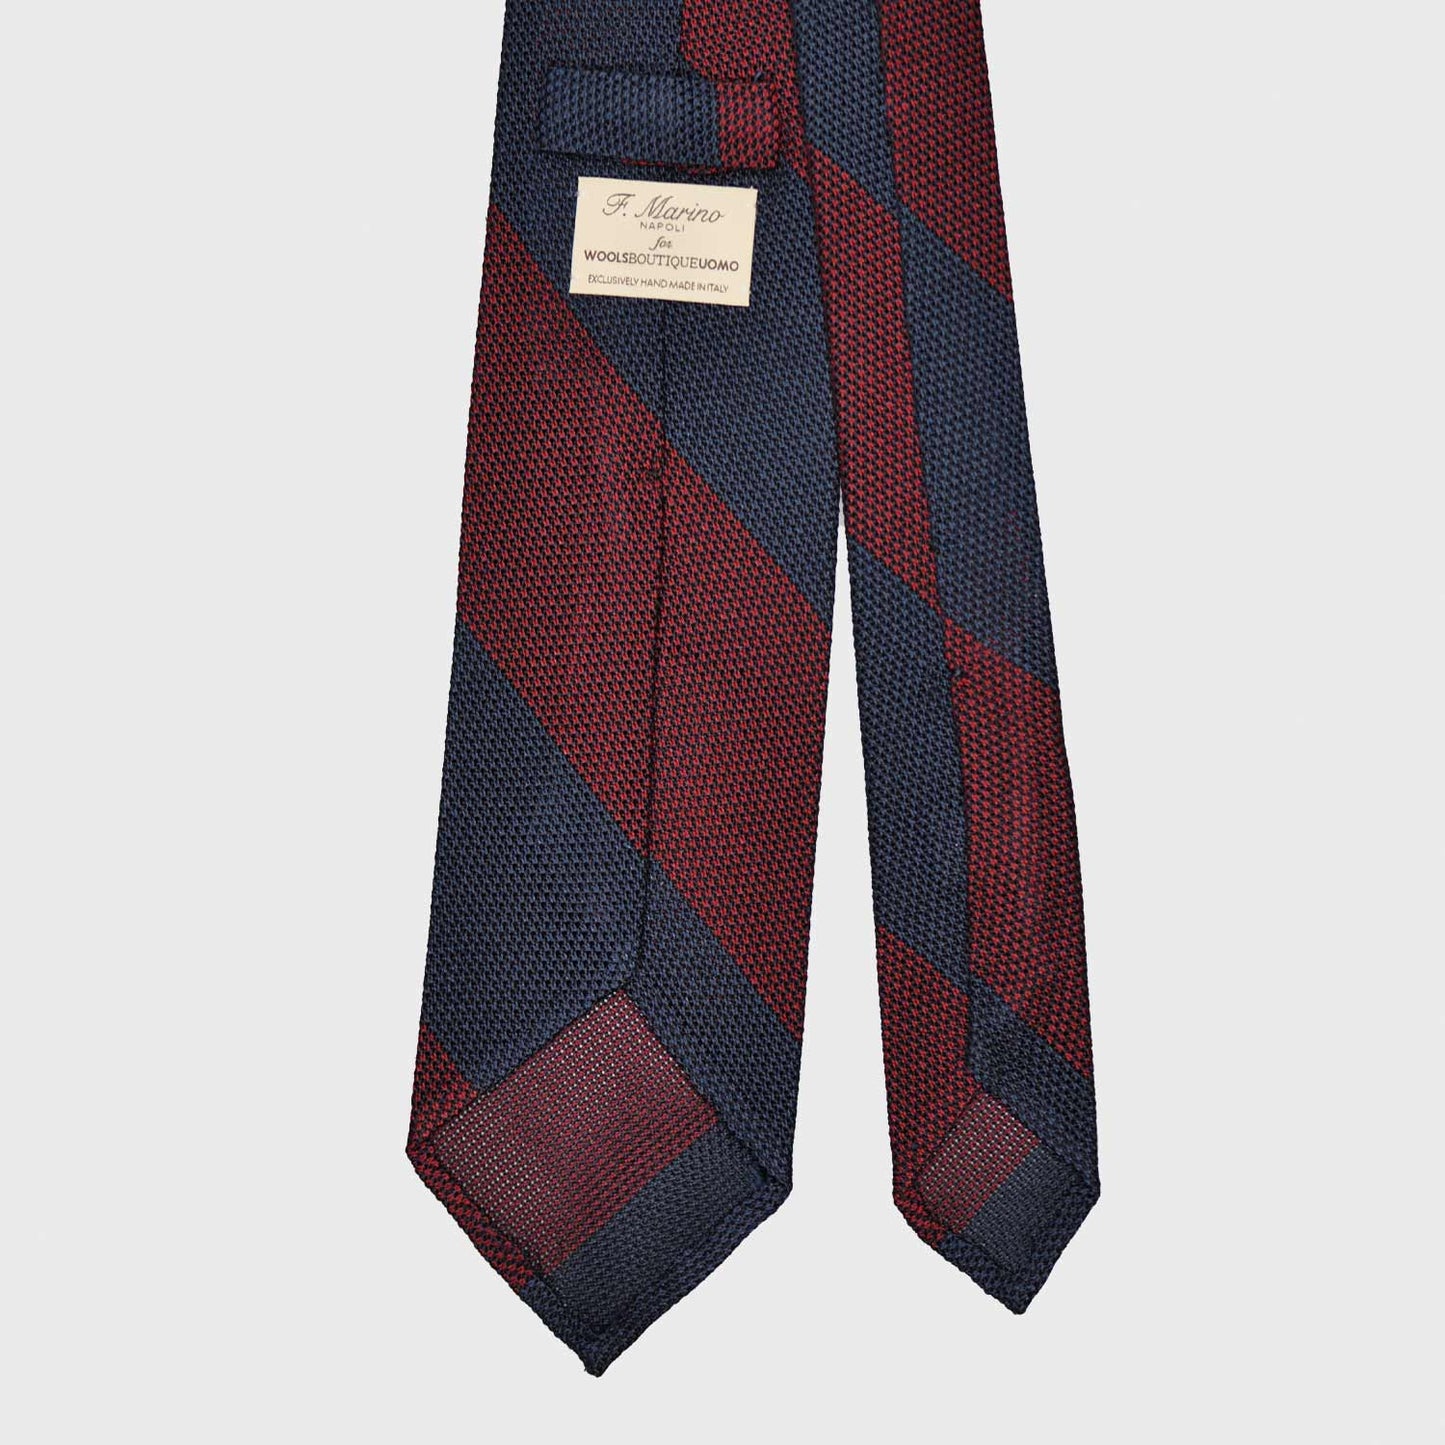 Wide striped silk tie made with refined grenadine silk, hand made tie F.Marino Napoli exclusive for Wools Boutique Uomo, hand rolled edge, 3 folds unlined, striped burgundy red and navy blue